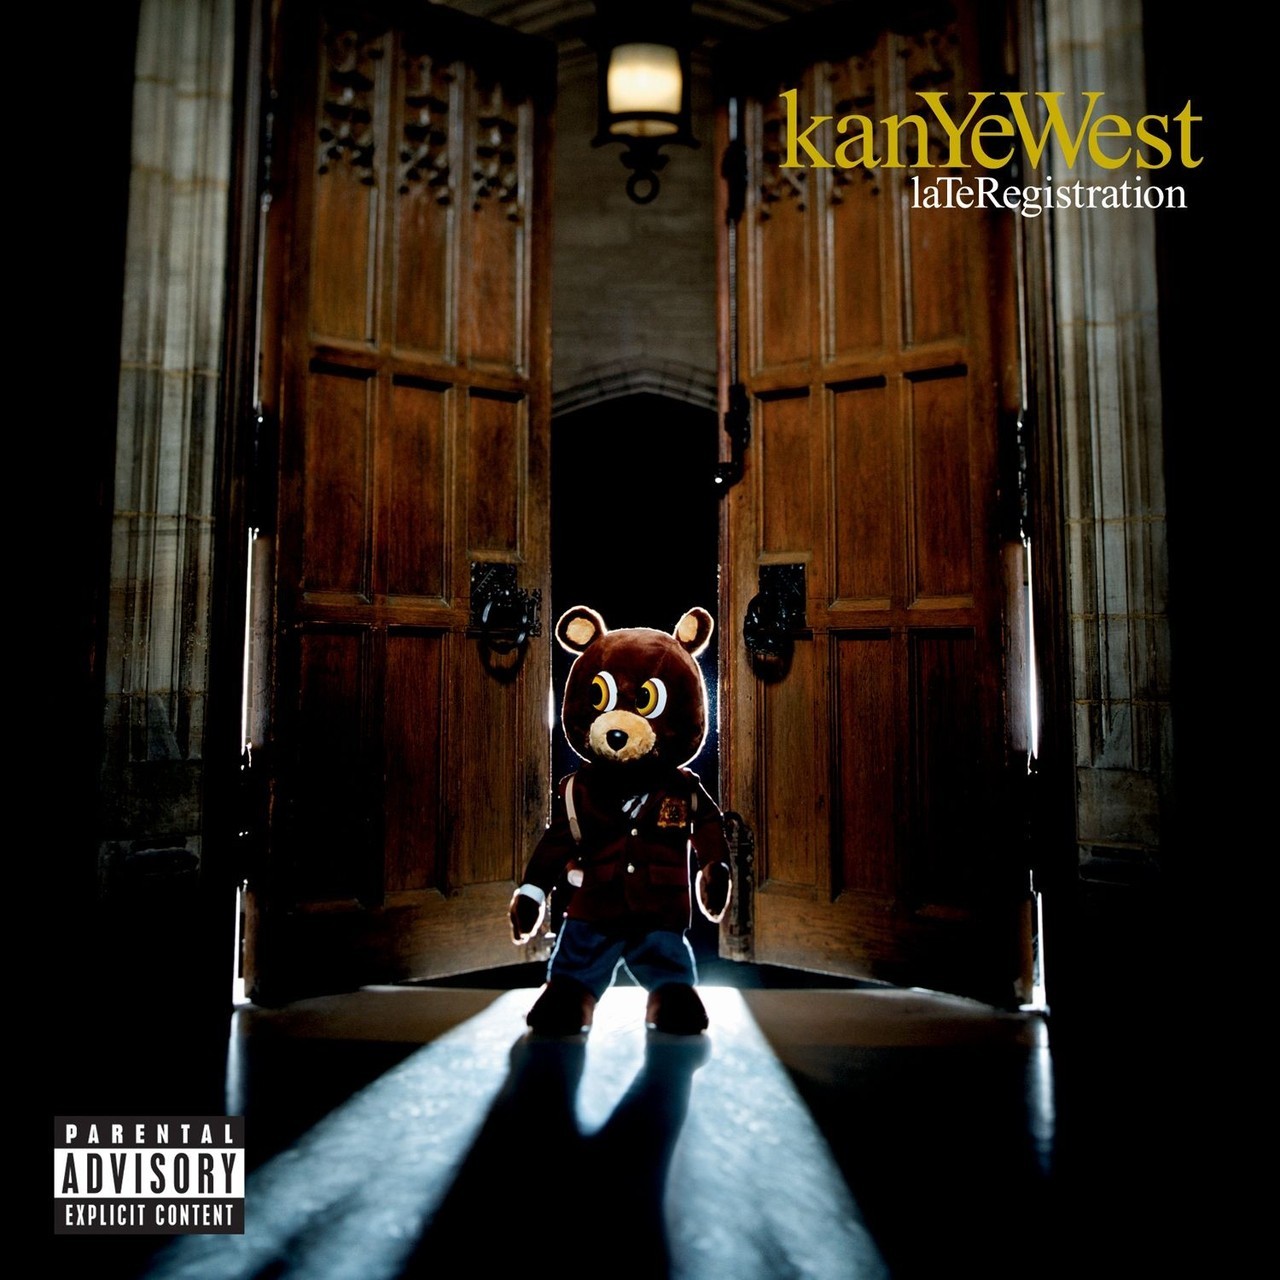 BACK IN THE DAY |8/30/05| Kanye West released his second album, Late Registration